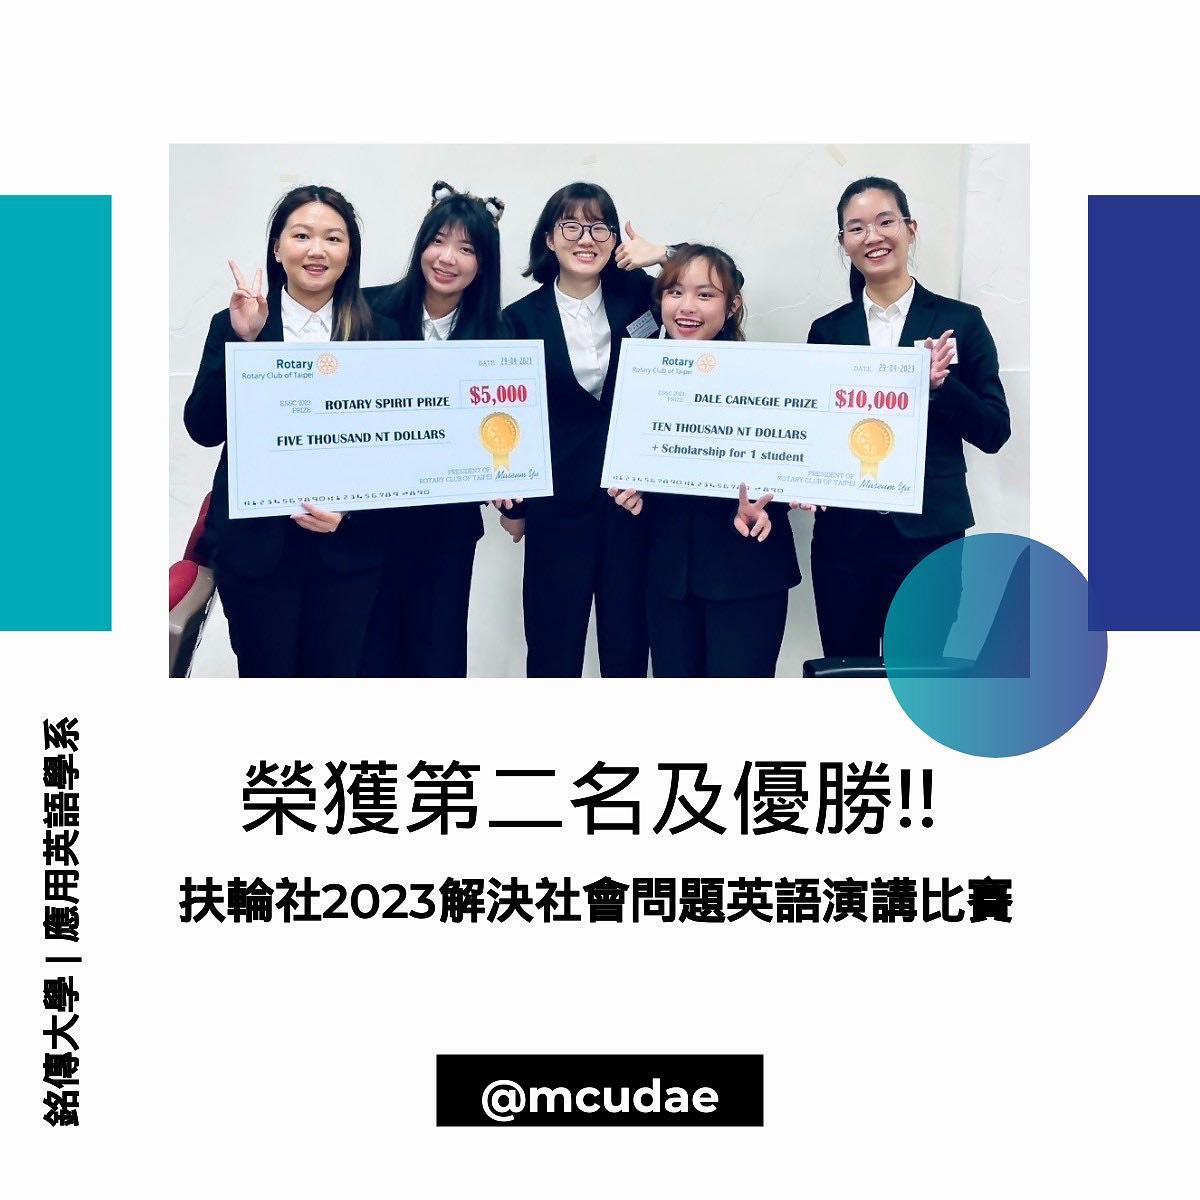 Featured image for “The students led by Dr. Cheng Hsin-fu (鄭杏孚老師) and participating in the 2023 English Social Solutions Contest have once again achieved great success.”